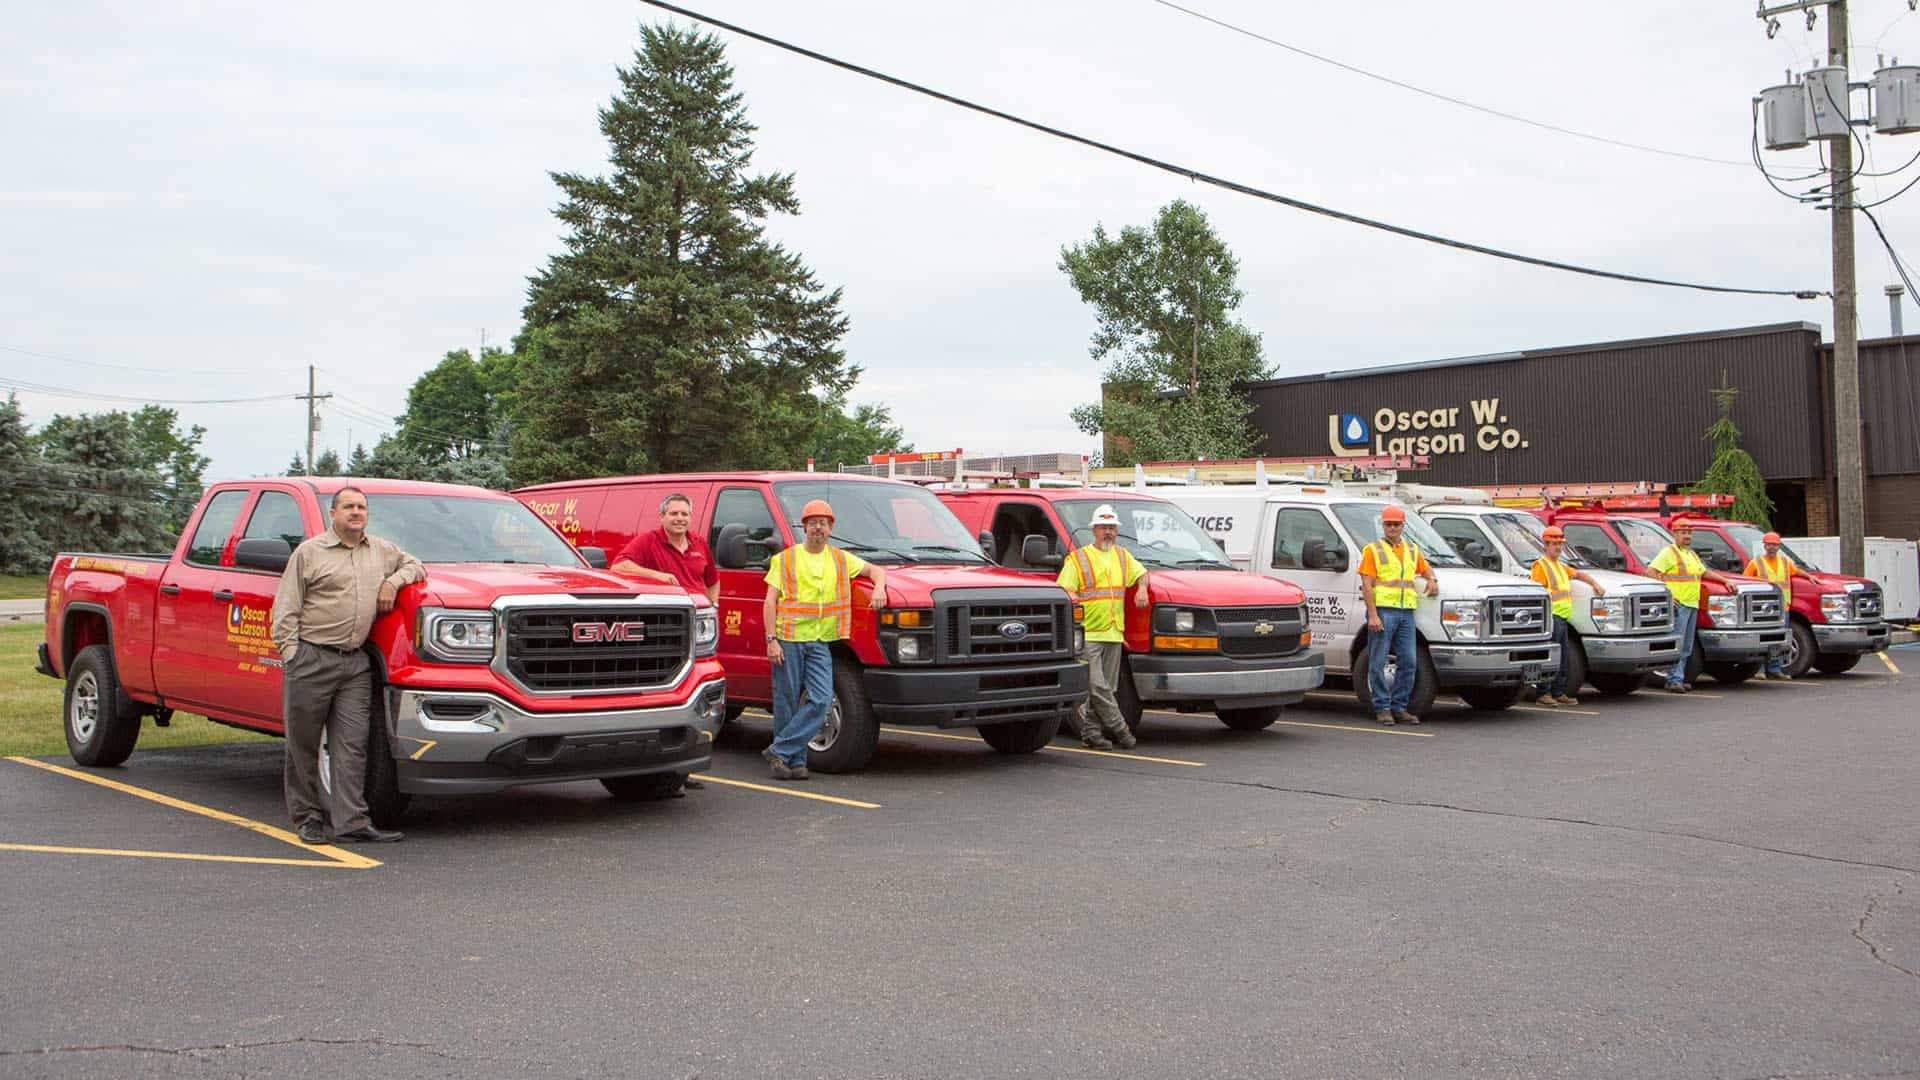 The team of contractors at Oscar W. Larson Co.